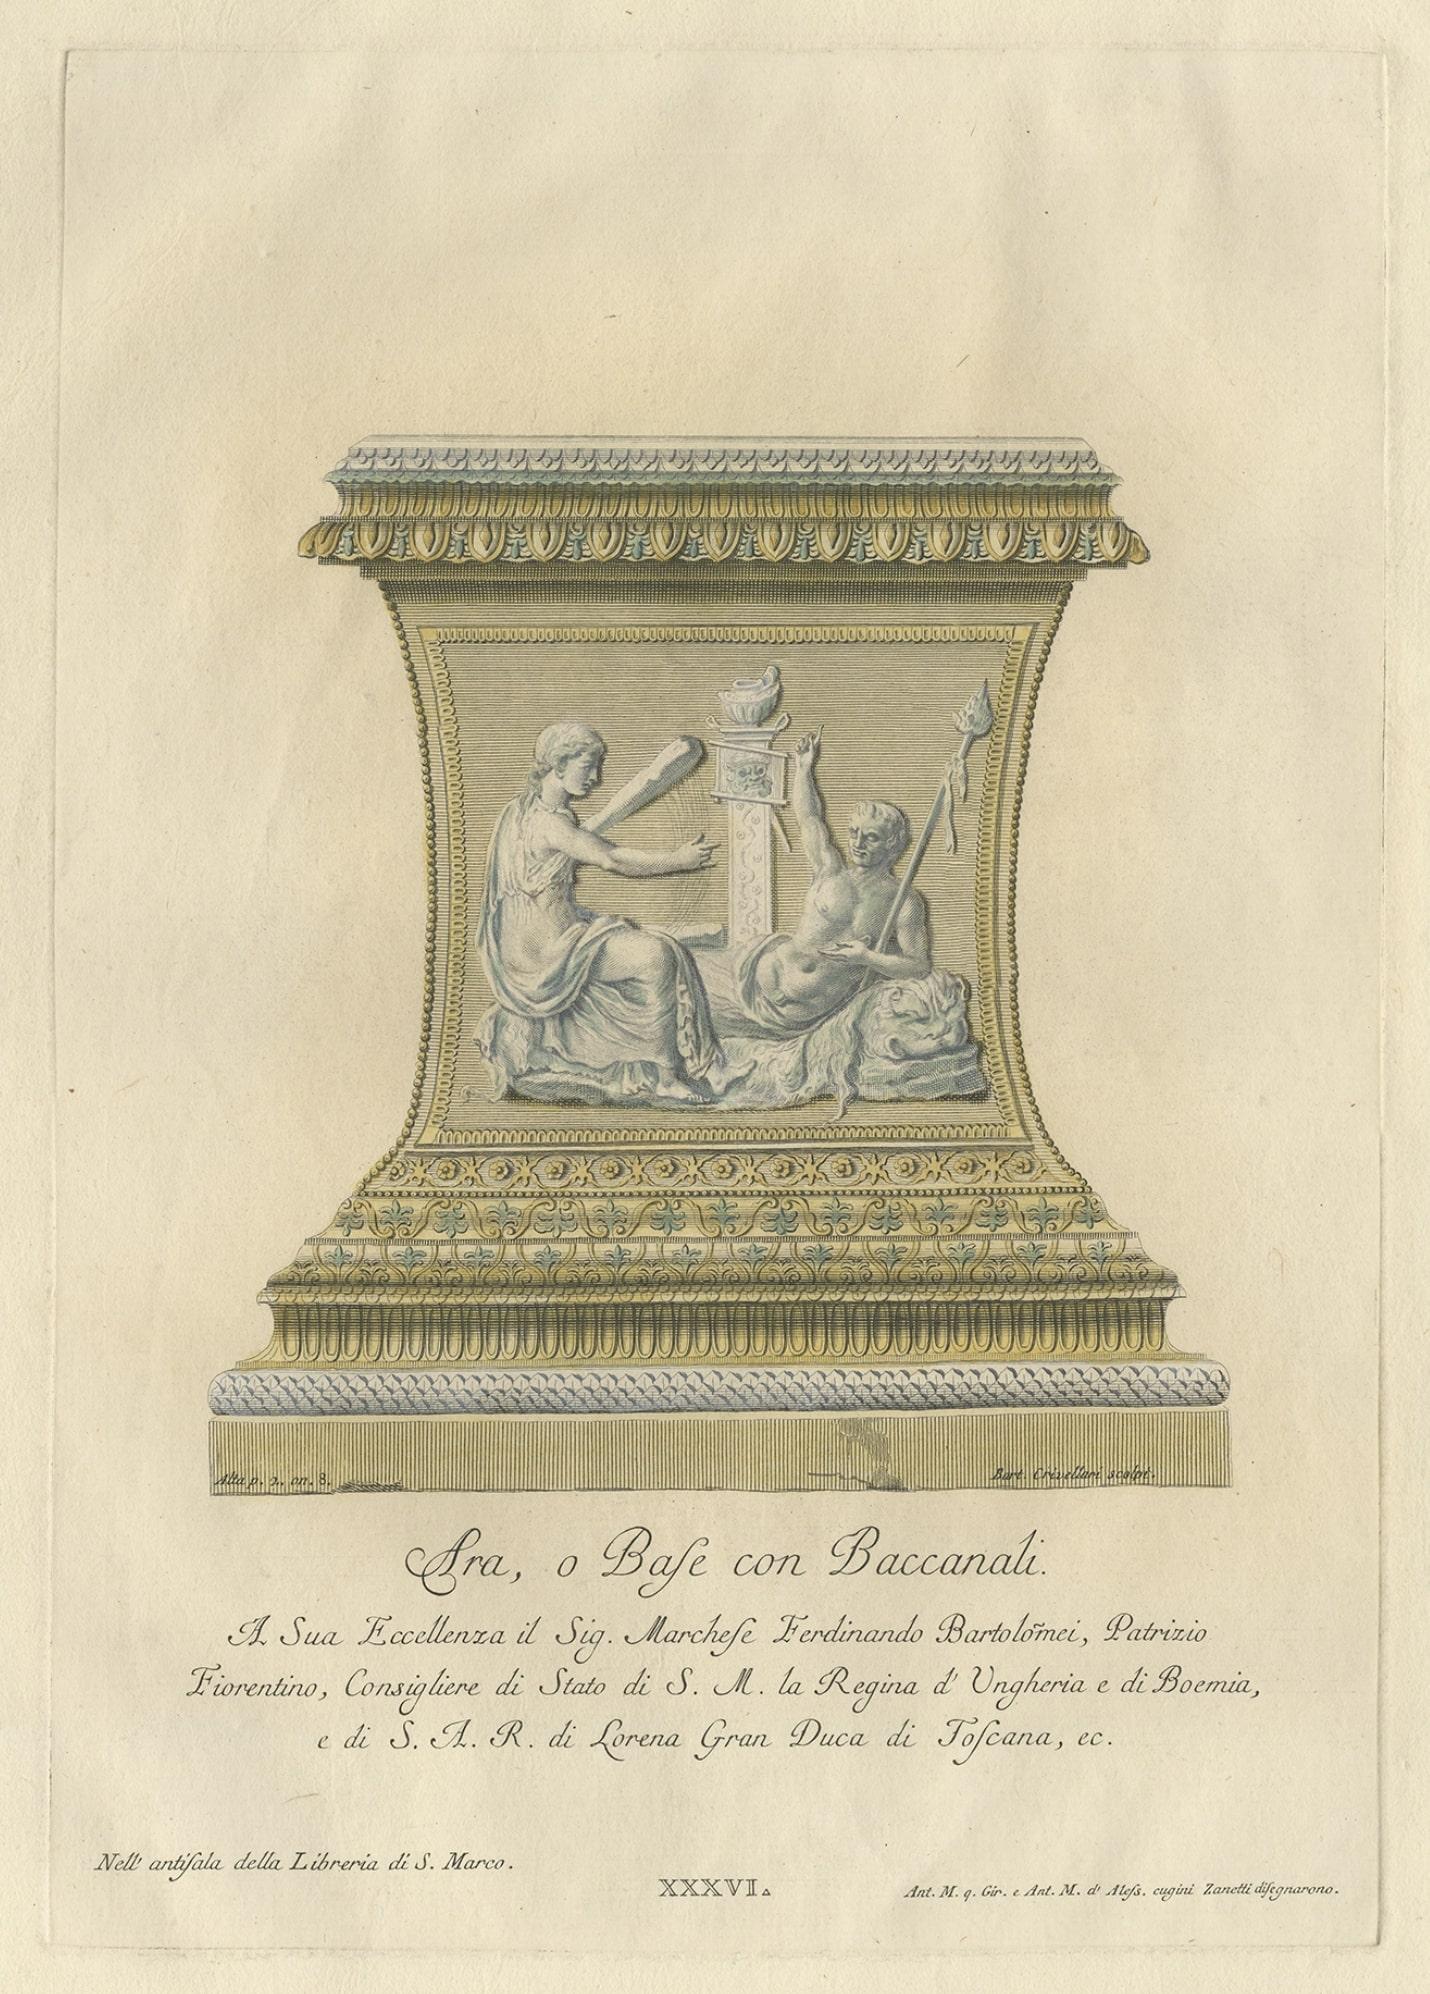 Antique print titled 'Ara, o Base con Baccanali'. Plate XXXVI: 

A large, ornamental Bacchic altar or pedestal, with a relief in the centre showing a female sitting beside a reclining male who points towards a pedestal supporting a vase and an image